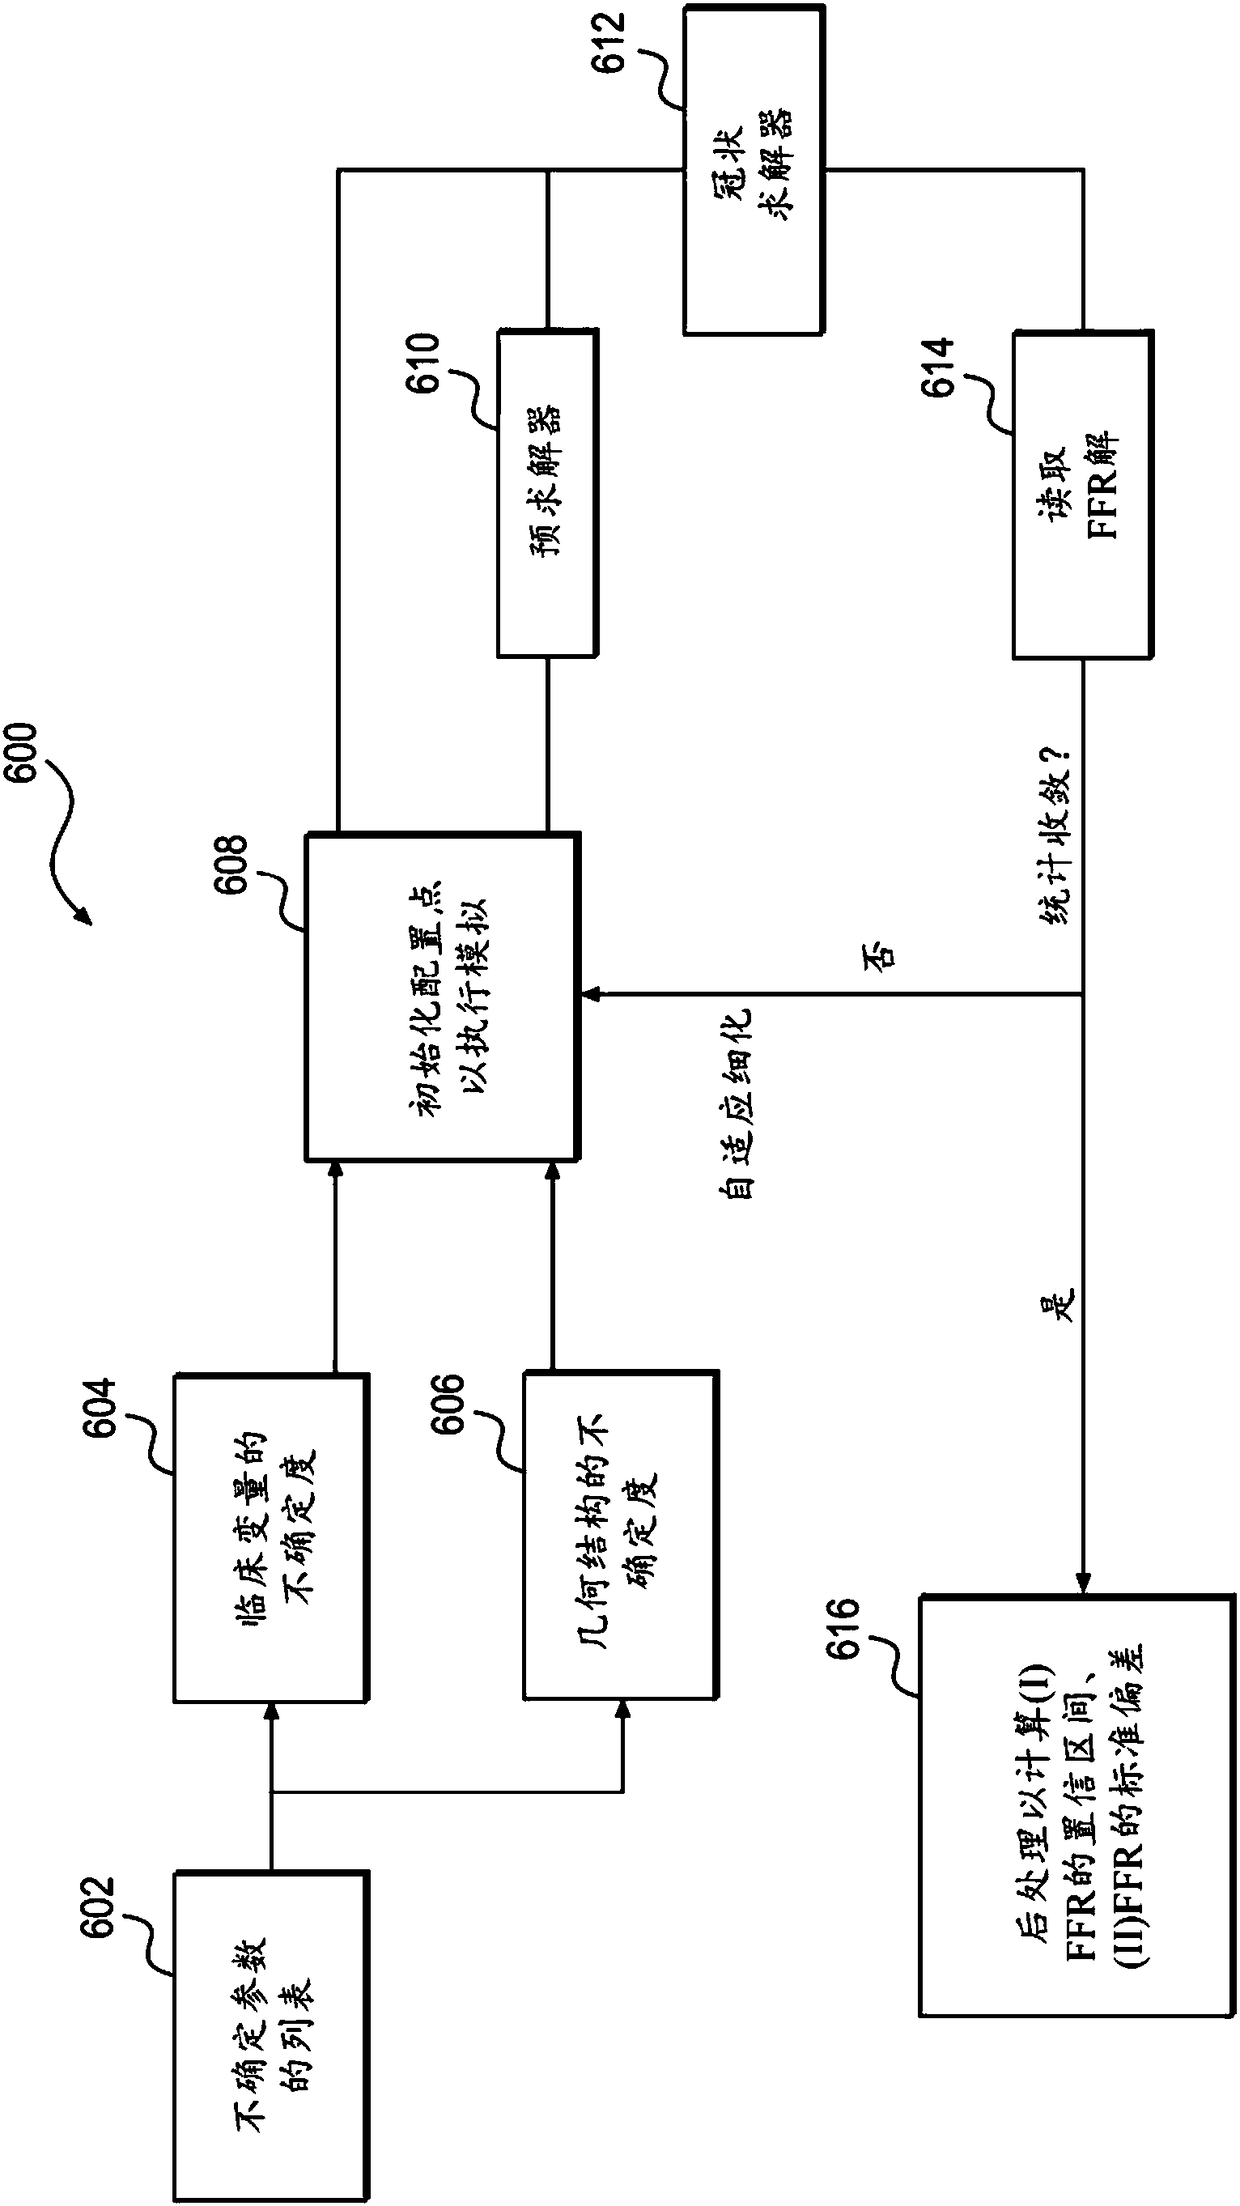 Method and system for sensitivity analysis in modeling blood flow properties